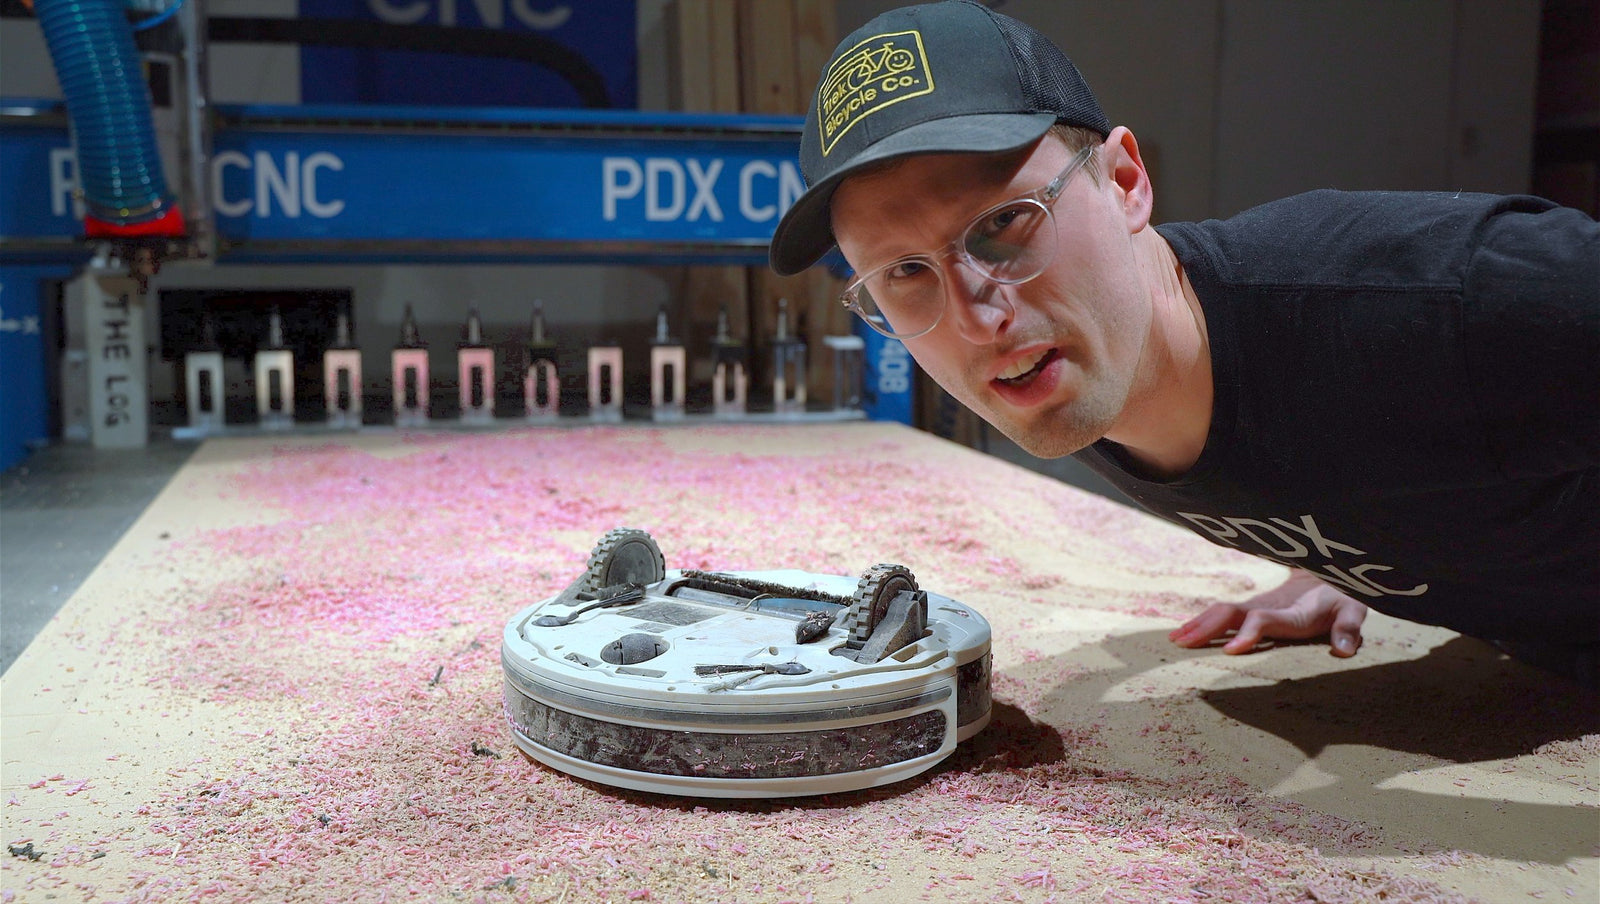 Does a Robot Vacuum Work in a CNC Shop?